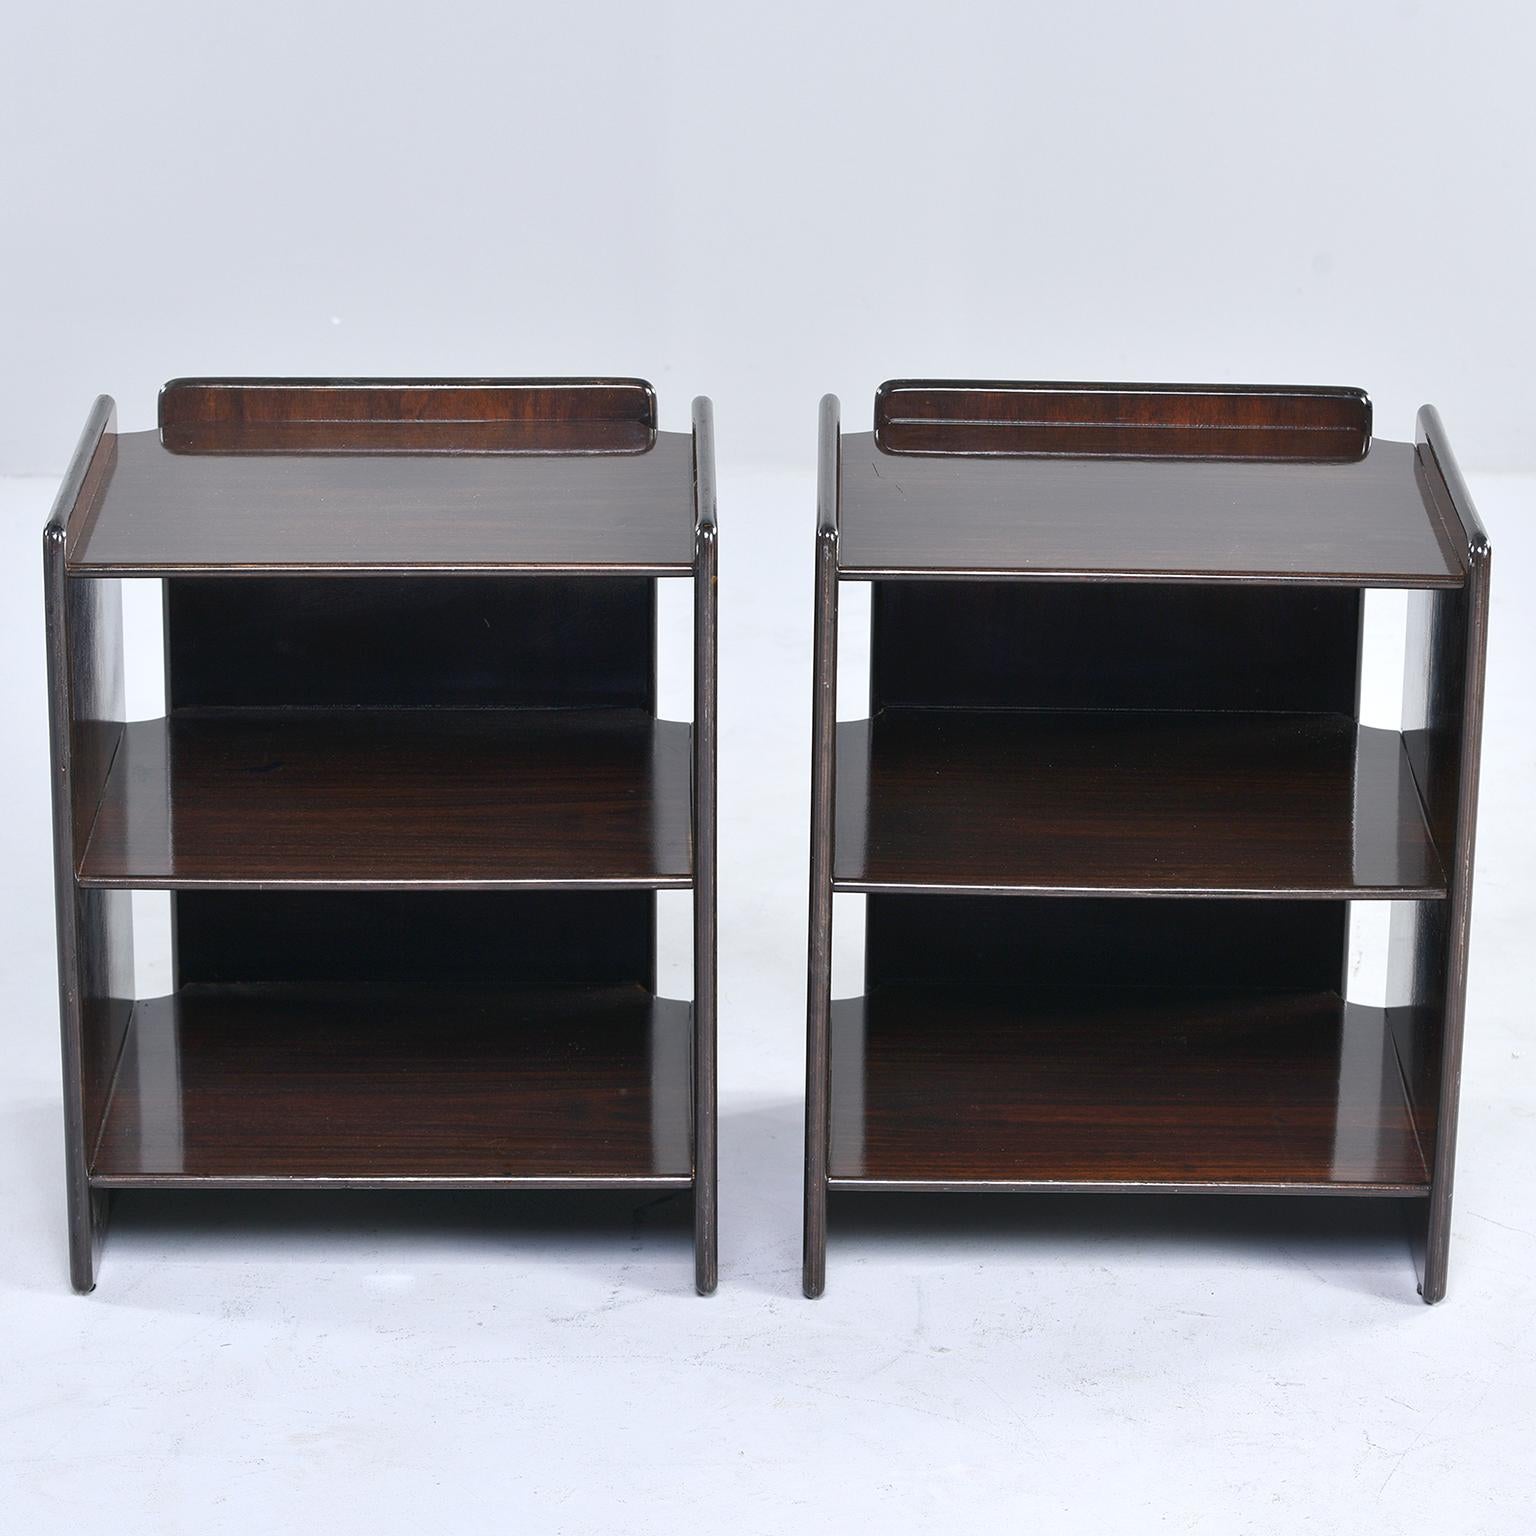 Pair of open shelf style side tables in dark walnut. Modified cubist style with open space between side and back panels. Unknown maker. Found in Italy. Sold and priced as a pair.